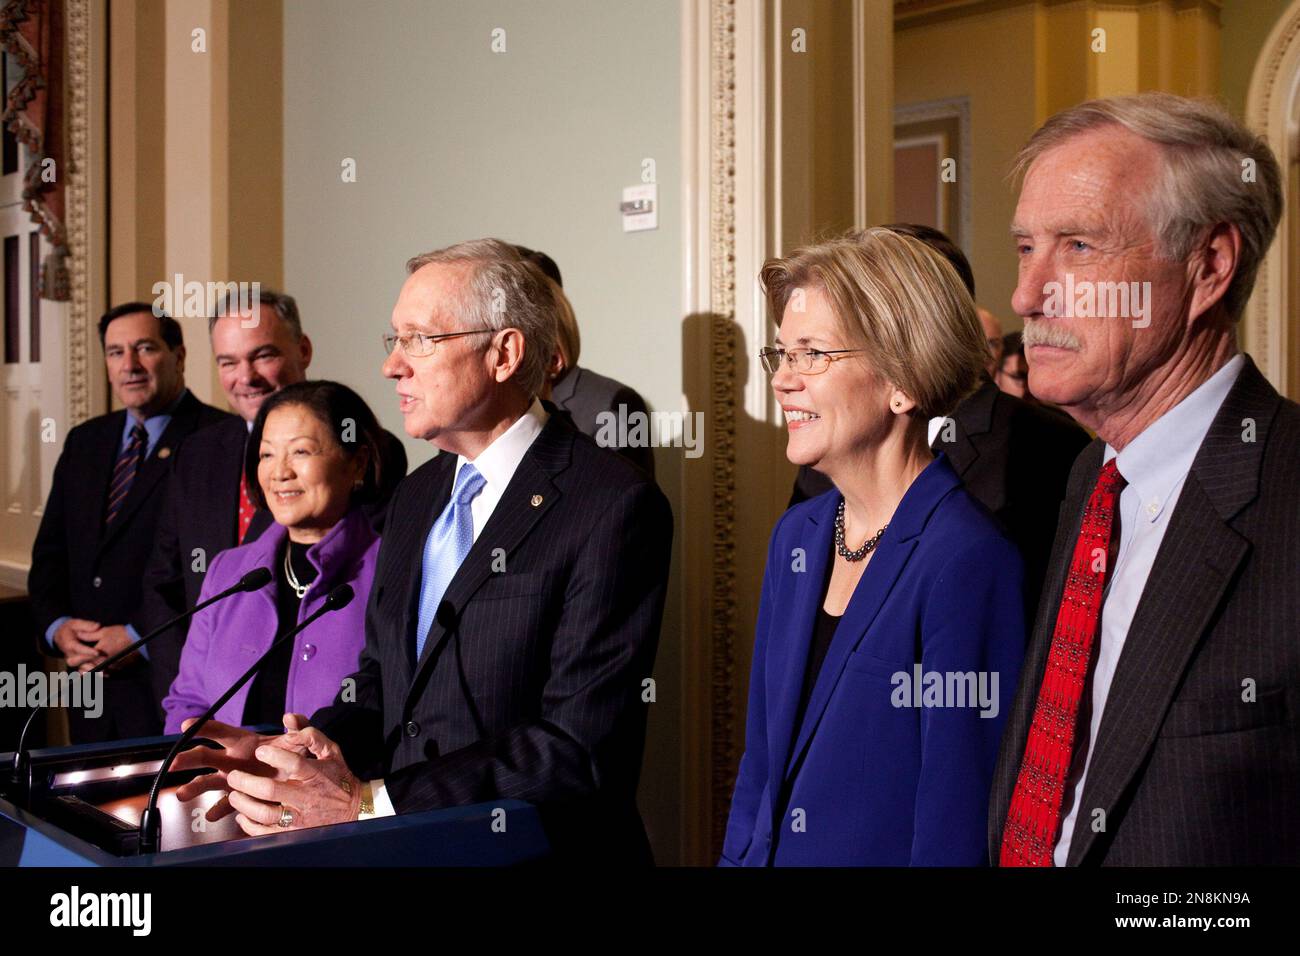 Senate Majority Leader Harry Reid of Nev., center. accompanied by incoming Senate Democrats, speaks during a news conference on Capitol Hill in Washington, Wednesday, Nov. 14, 2012. From left are, Sen.-elect Joe Donnelly, D-Ind., Sen.-elect Tim Kaine, D- Va., Sen.-elect, current Rep. Mazie Hirono, D-Hawaii, Reid, Sen.-elect Elizabeth Warren, D-Mass.,and Sen. -elect Angus King, I-Maine, who will caucus with the Democrats. (AP Photo/Harry Hamburg) Stockfoto